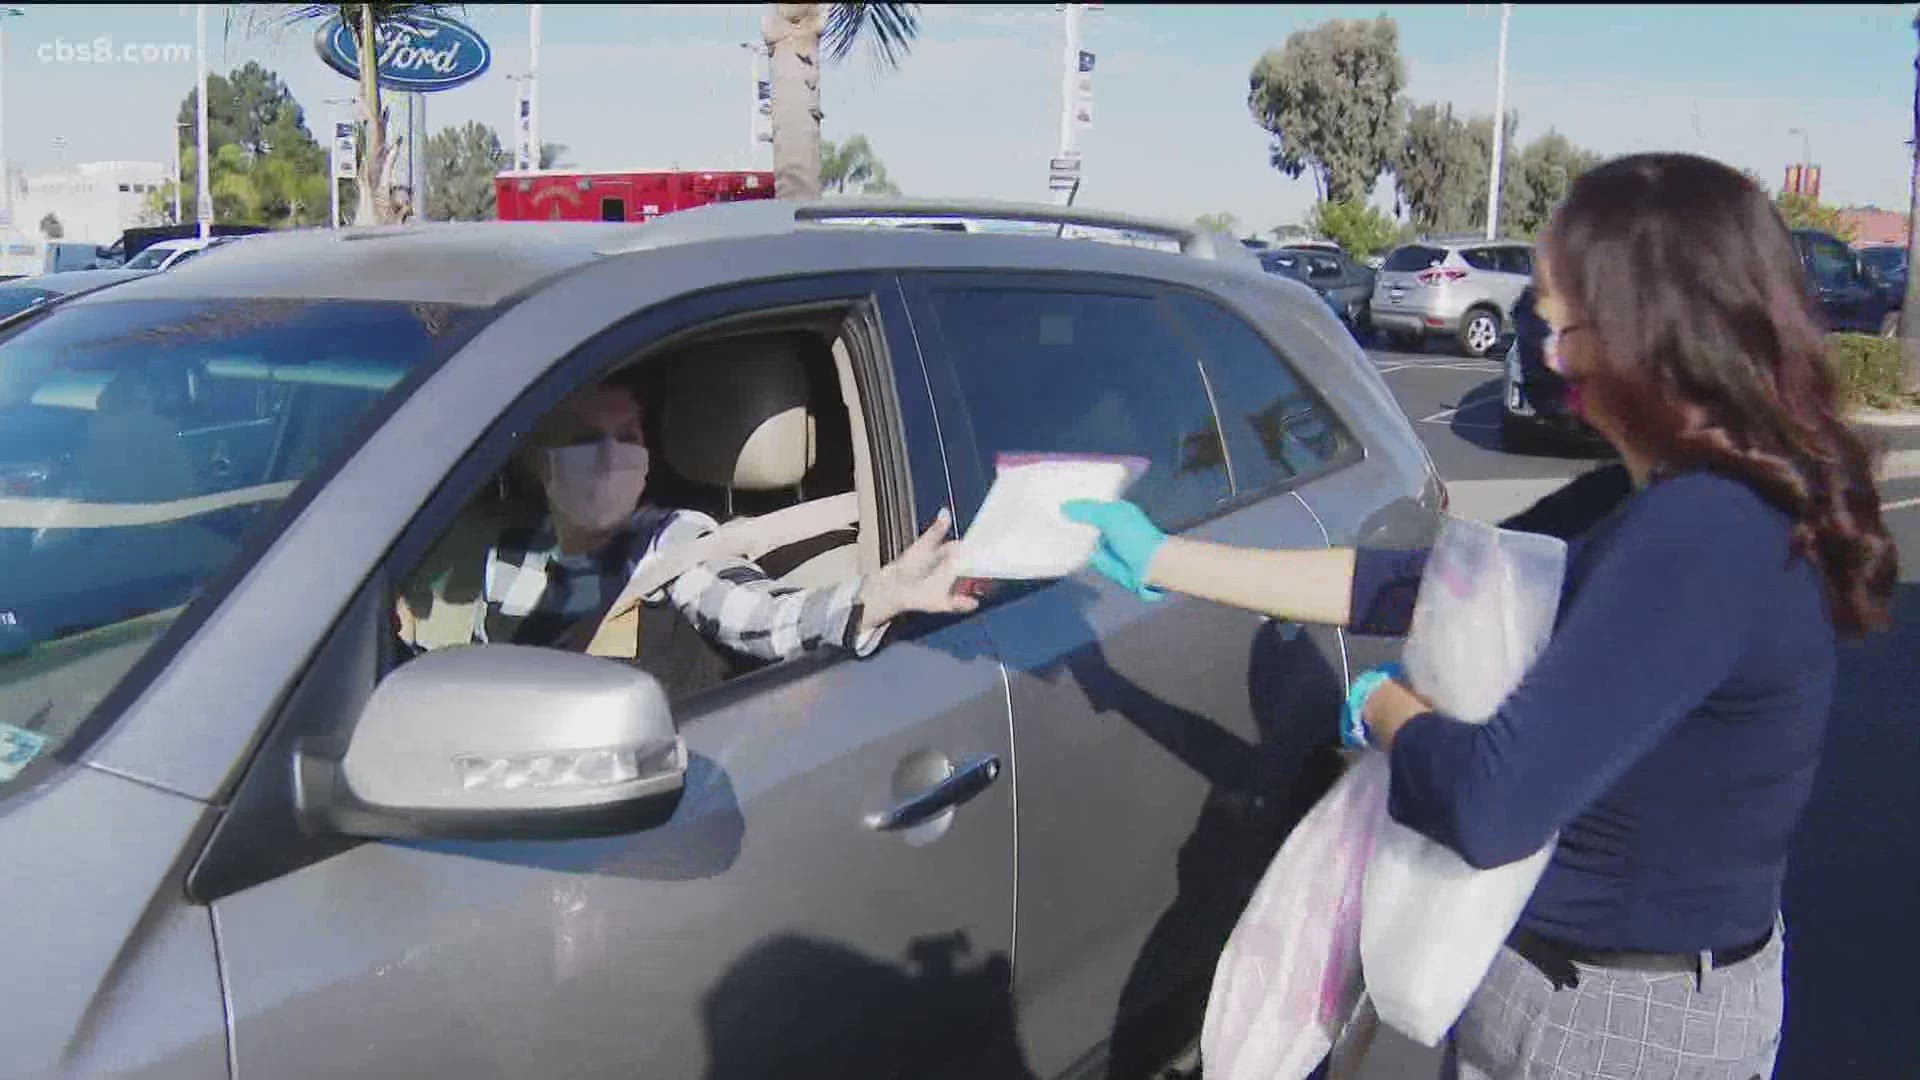 Ford teamed up with non-profits to give out 4 million medical masks across California on November 20.